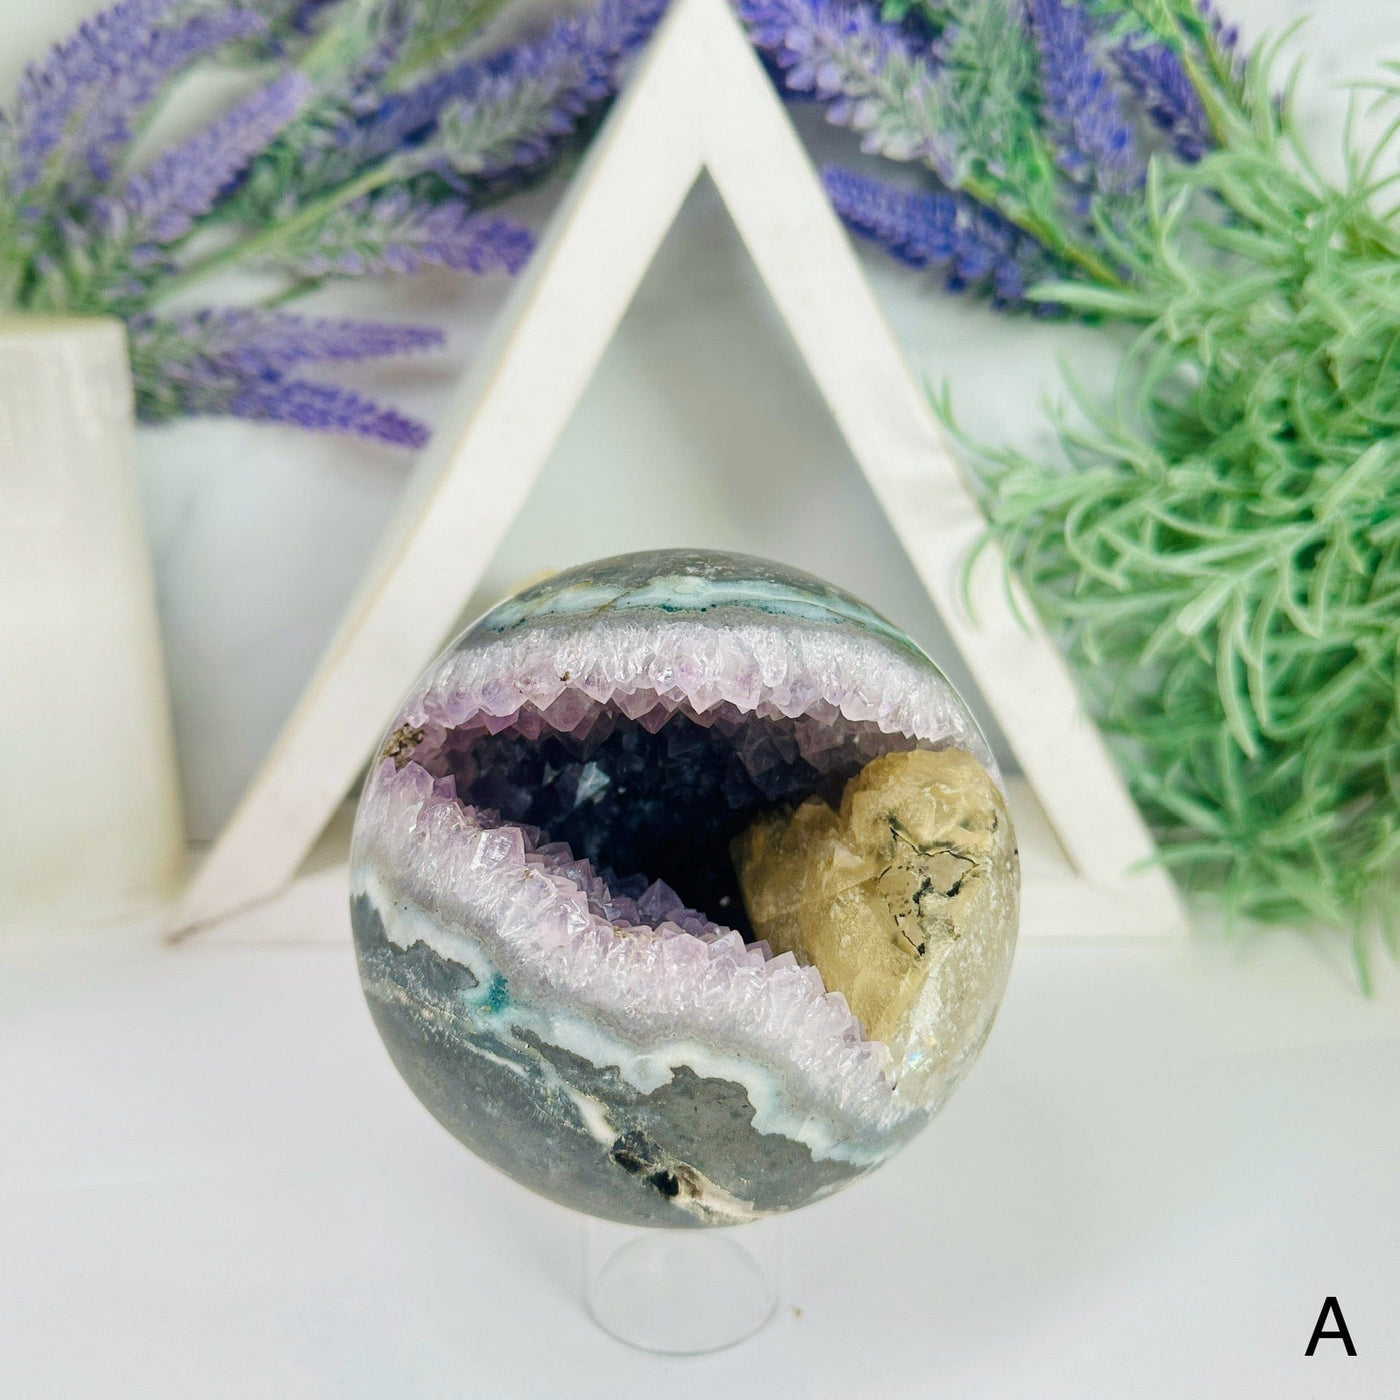 Amethyst Agate Crystal Sphere with Calcite - You Choose variant A labeled